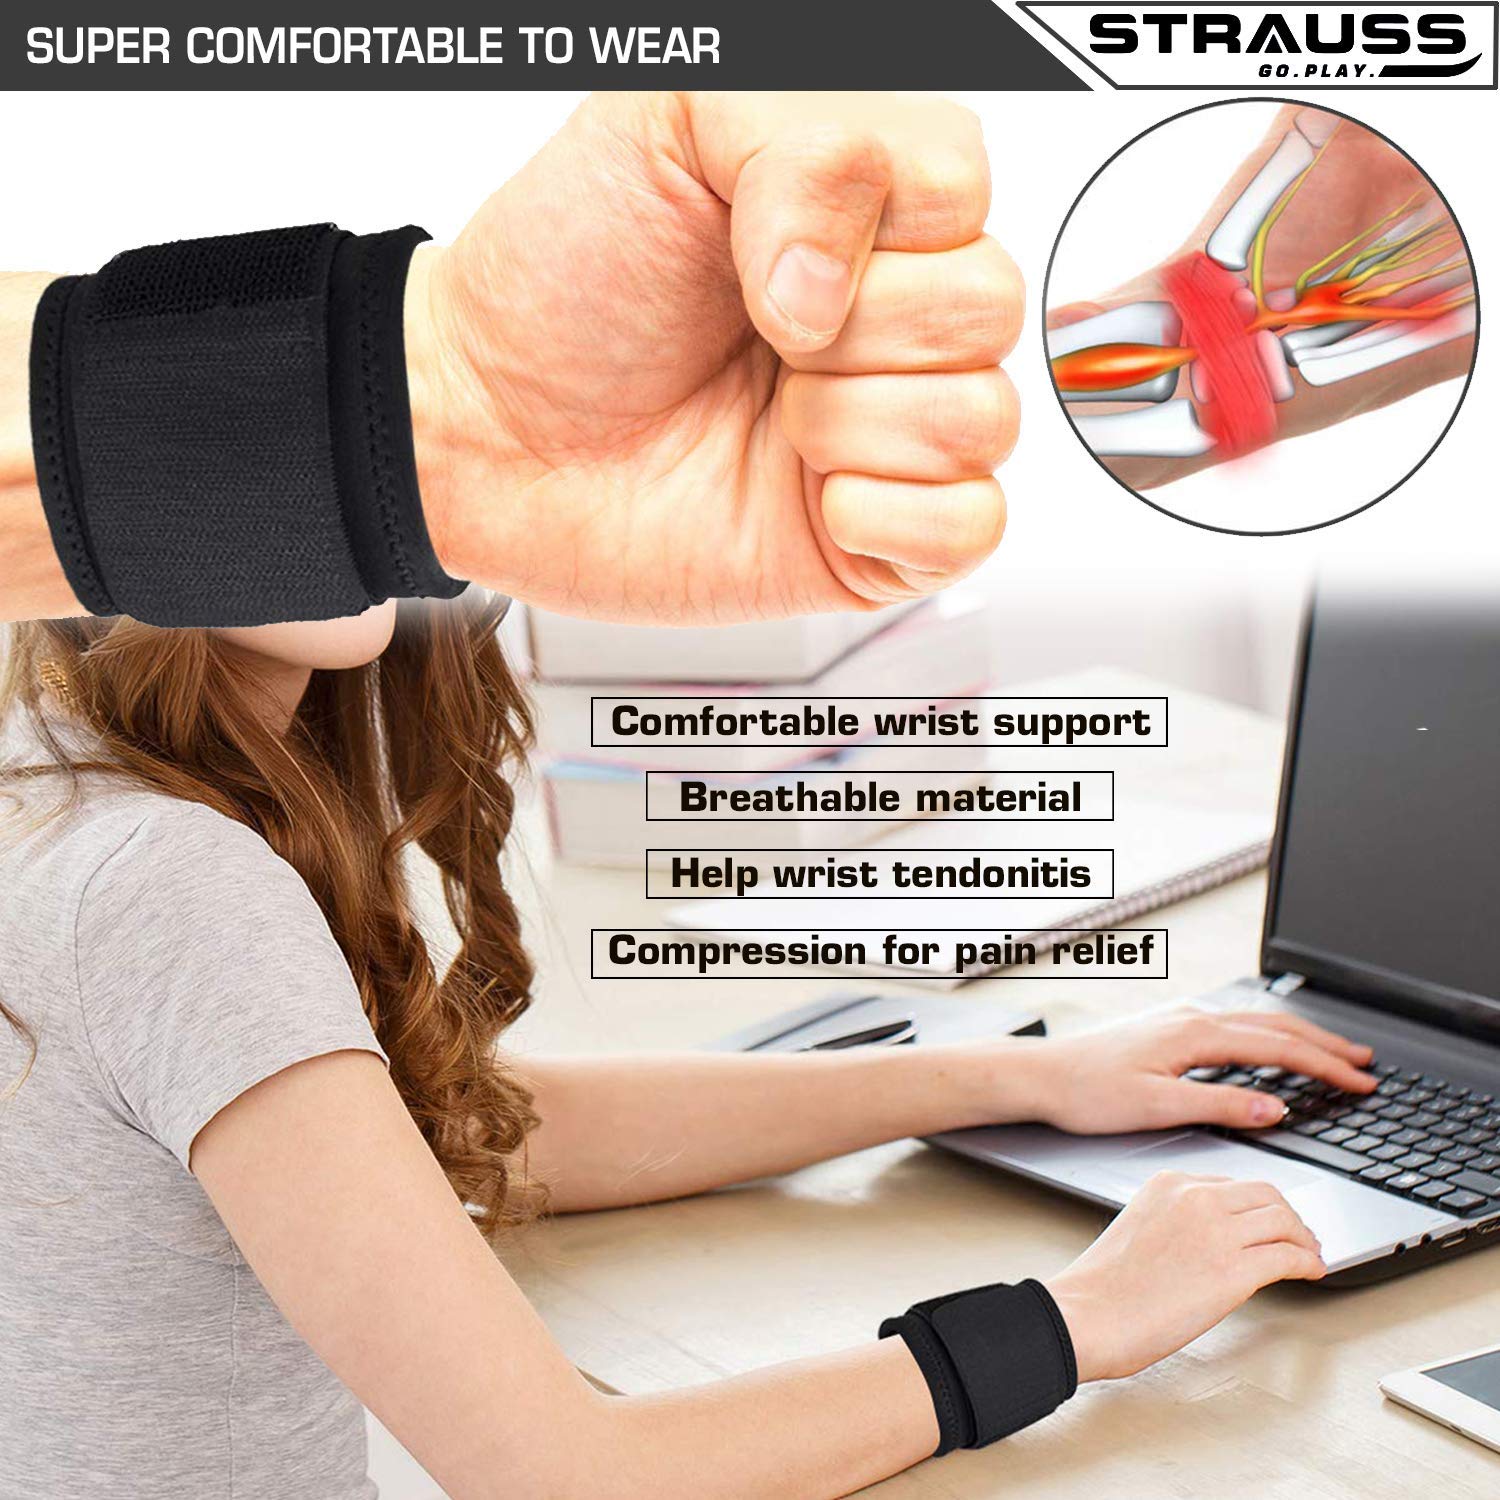 Strauss Wrist Support Pair (Free Size, Black) with Knee Support Patella